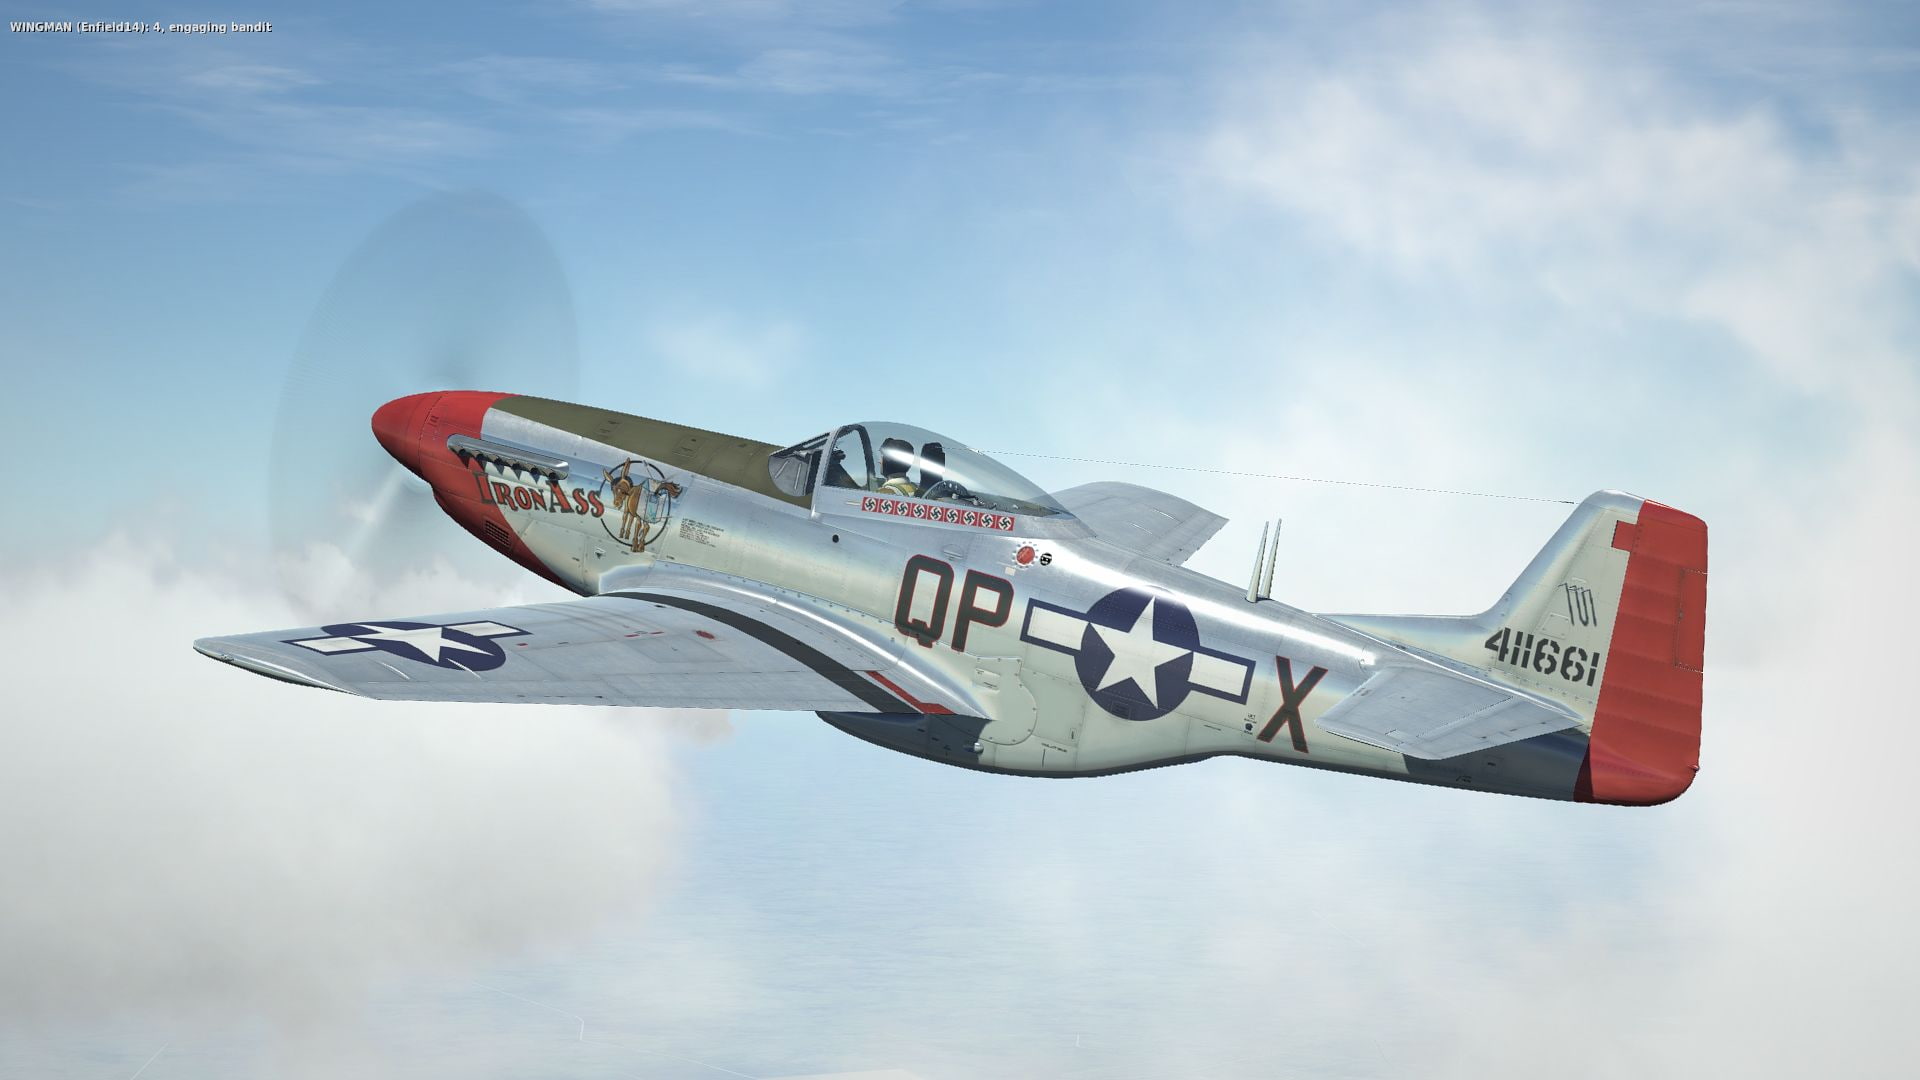 air, aircraft, airplane, fighter, force, military, mustang